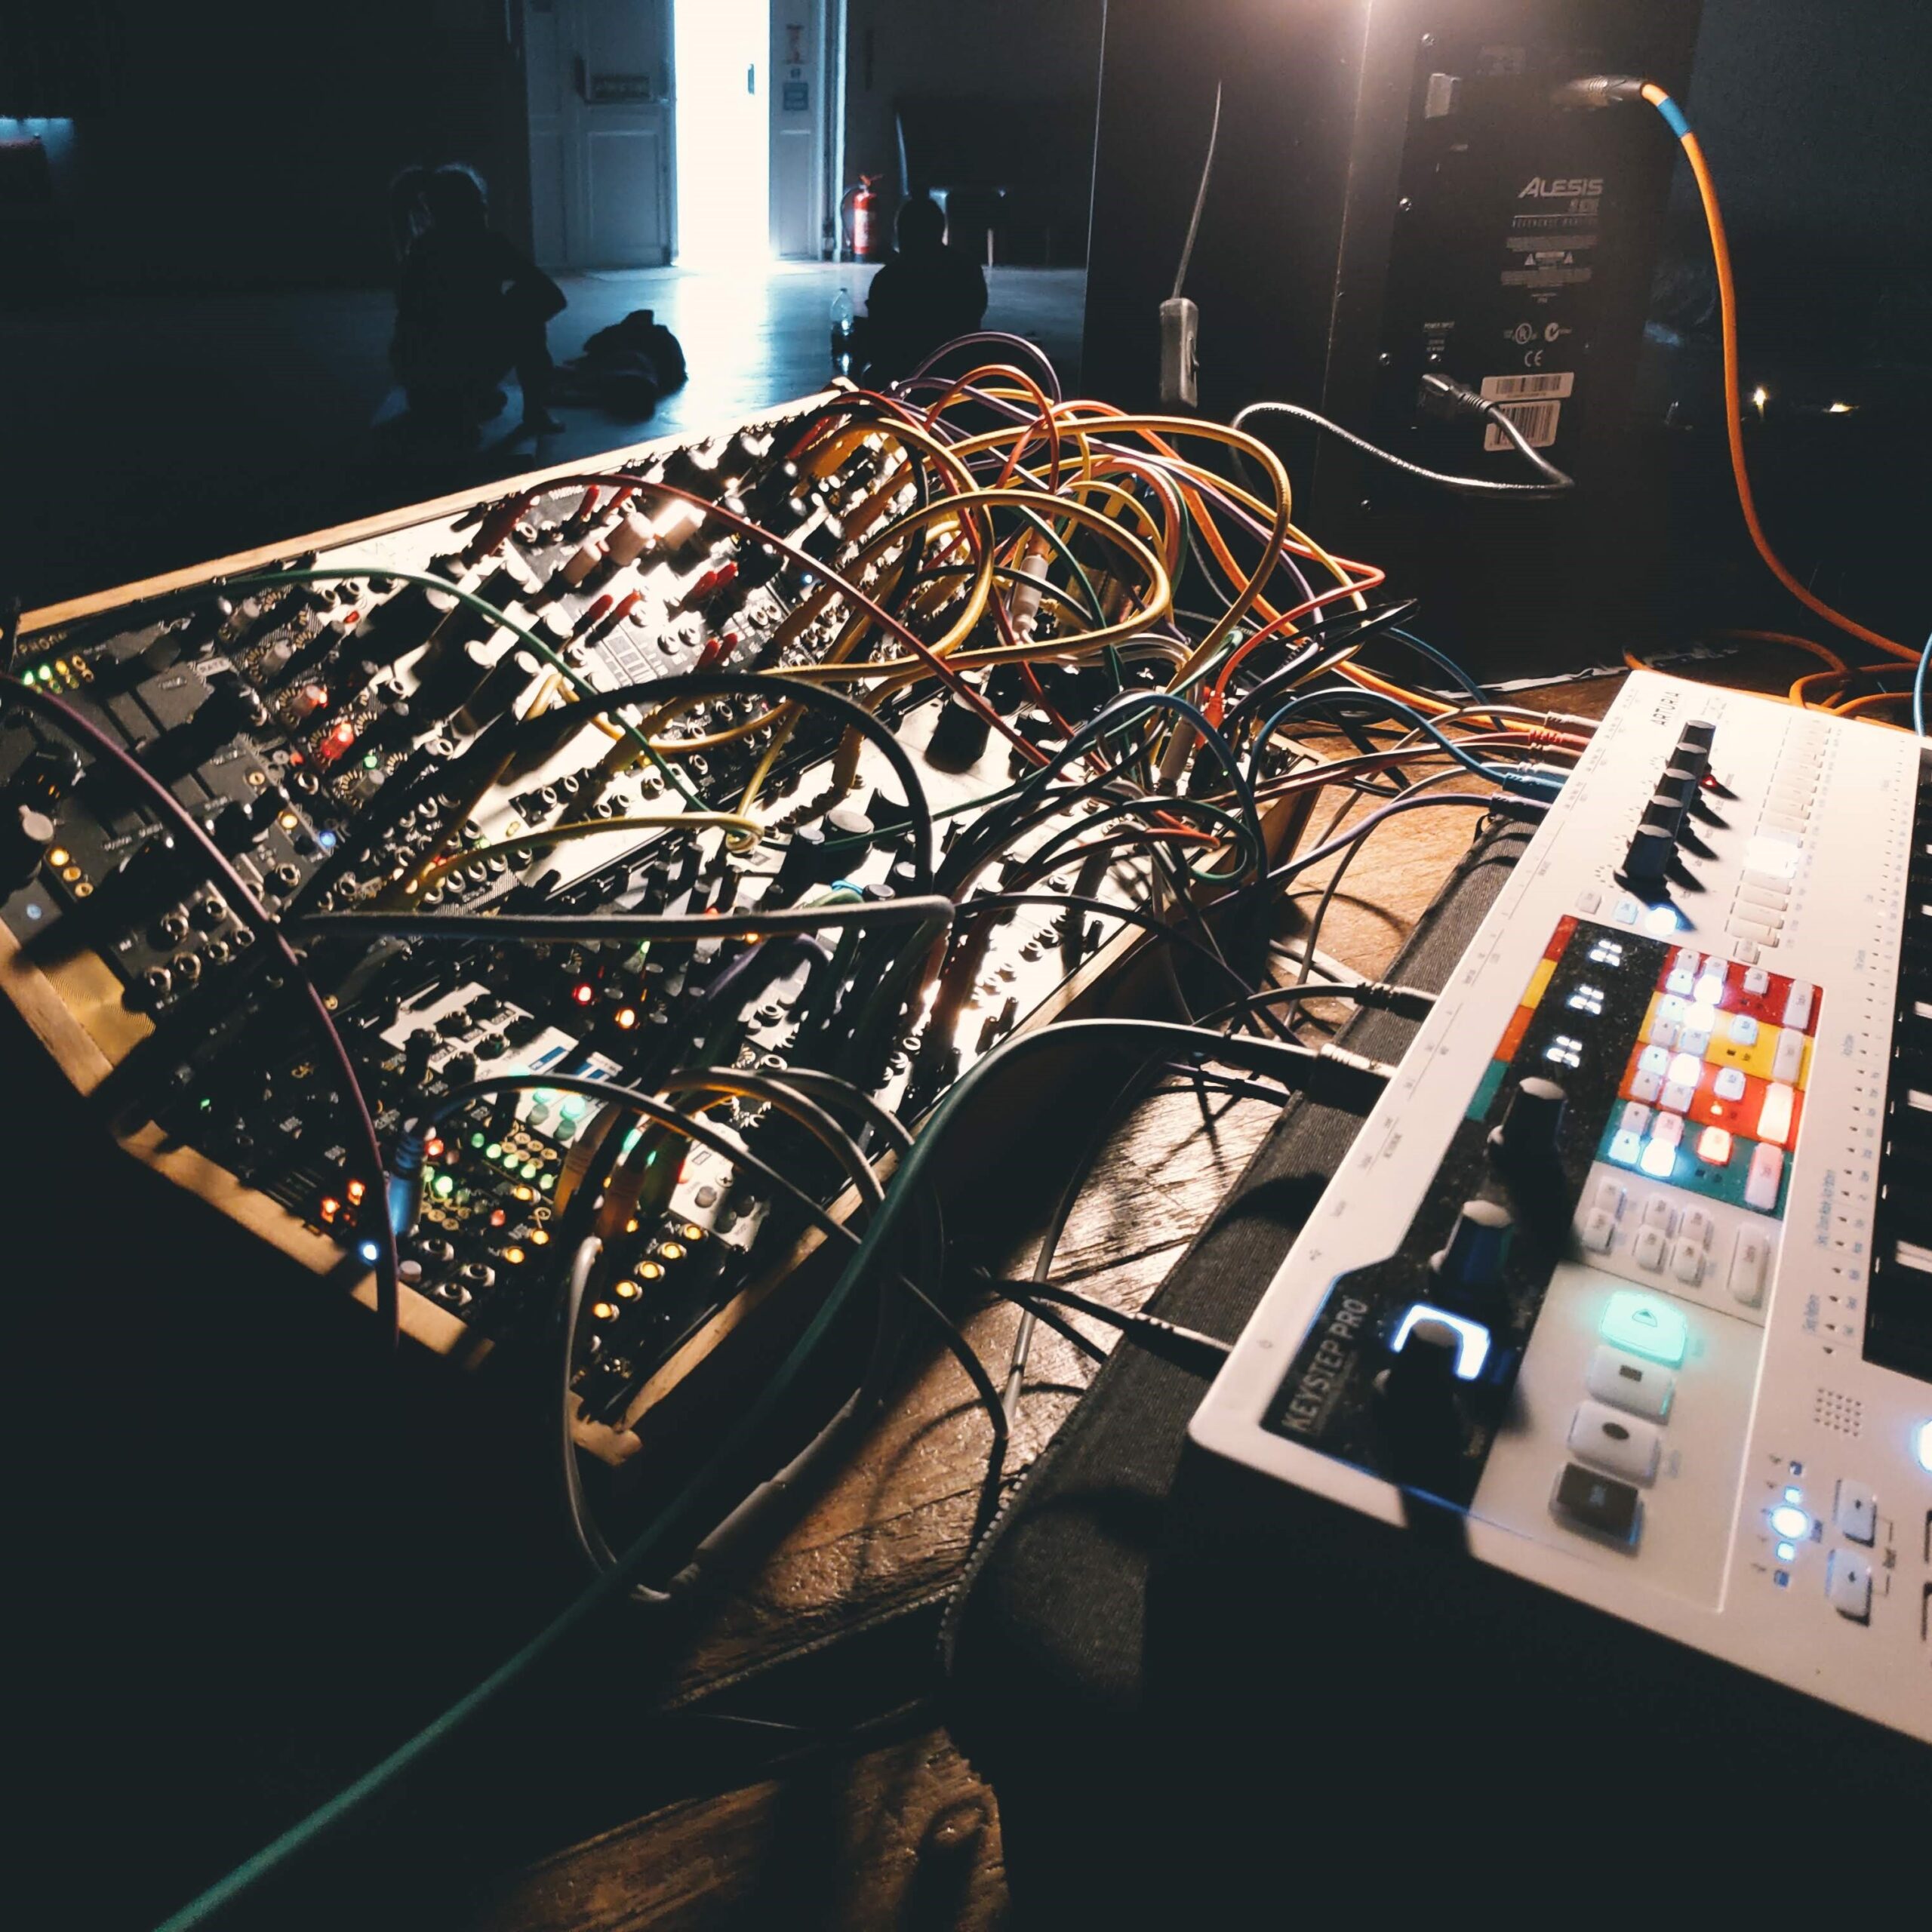 Unleash your creativity through modular synthesis This course will enable you discover your inner creative.  Finally create the music you always knew you could. £600